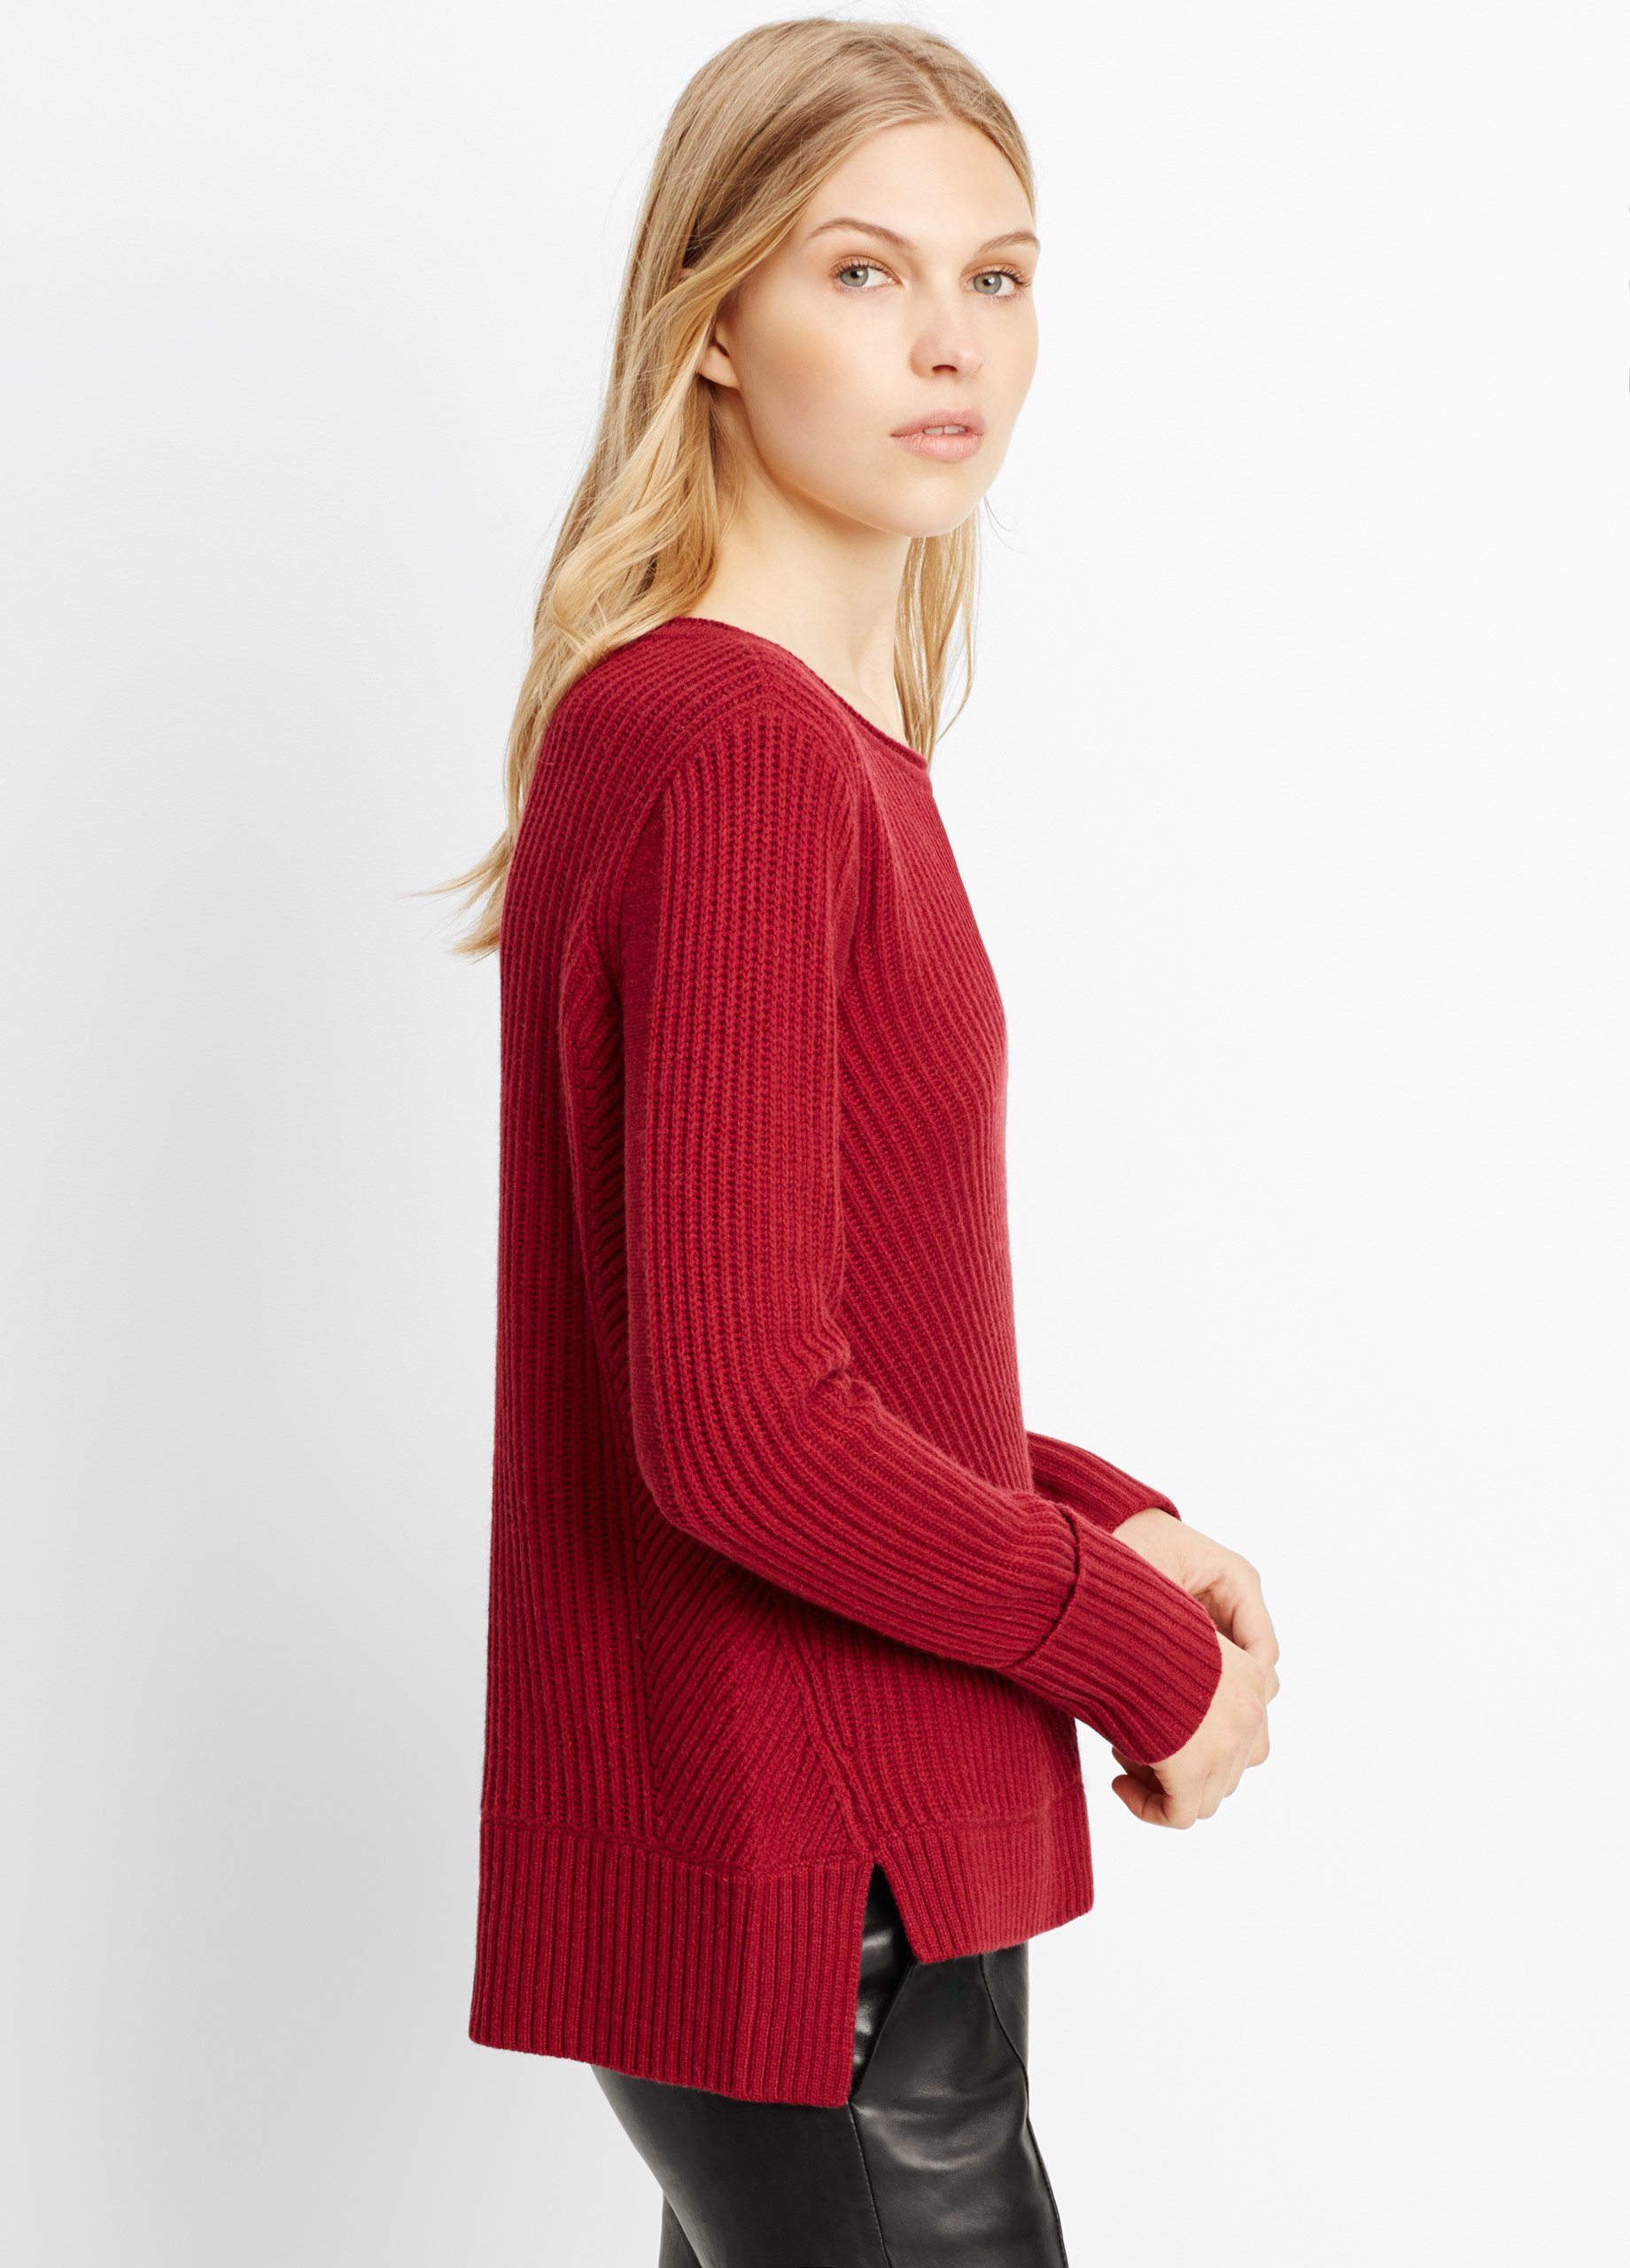 Vince Wool Cashmere Directional Rib Boatneck Sweater in Red | Lyst